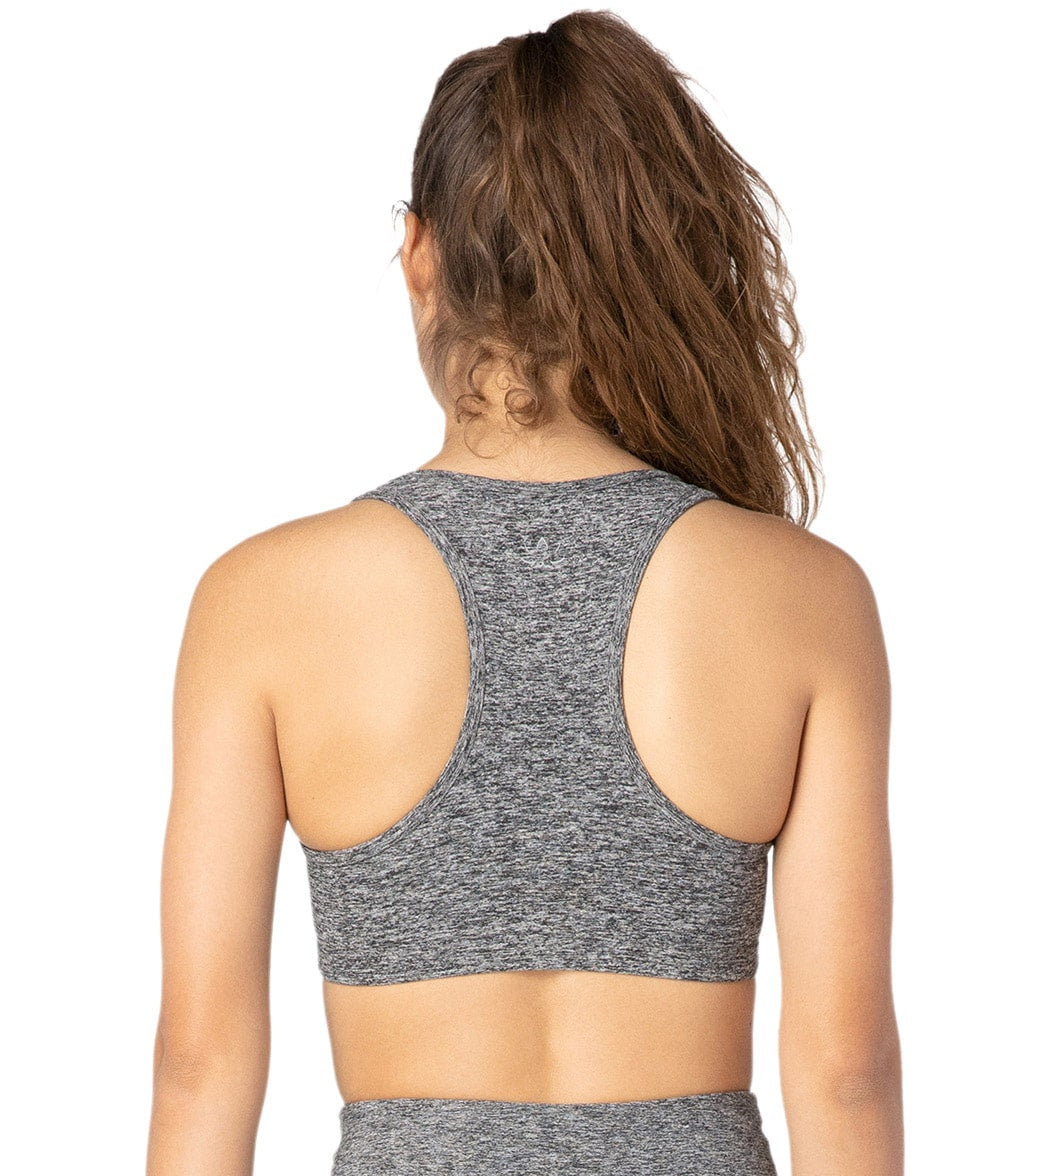 https://www.alloyapparesl.shop/wp-content/uploads/1706/55/only-25-20-usd-for-beyond-yoga-spacedye-lift-your-spirits-yoga-sports-bra-black-white-online-at-the-shop_2.jpg